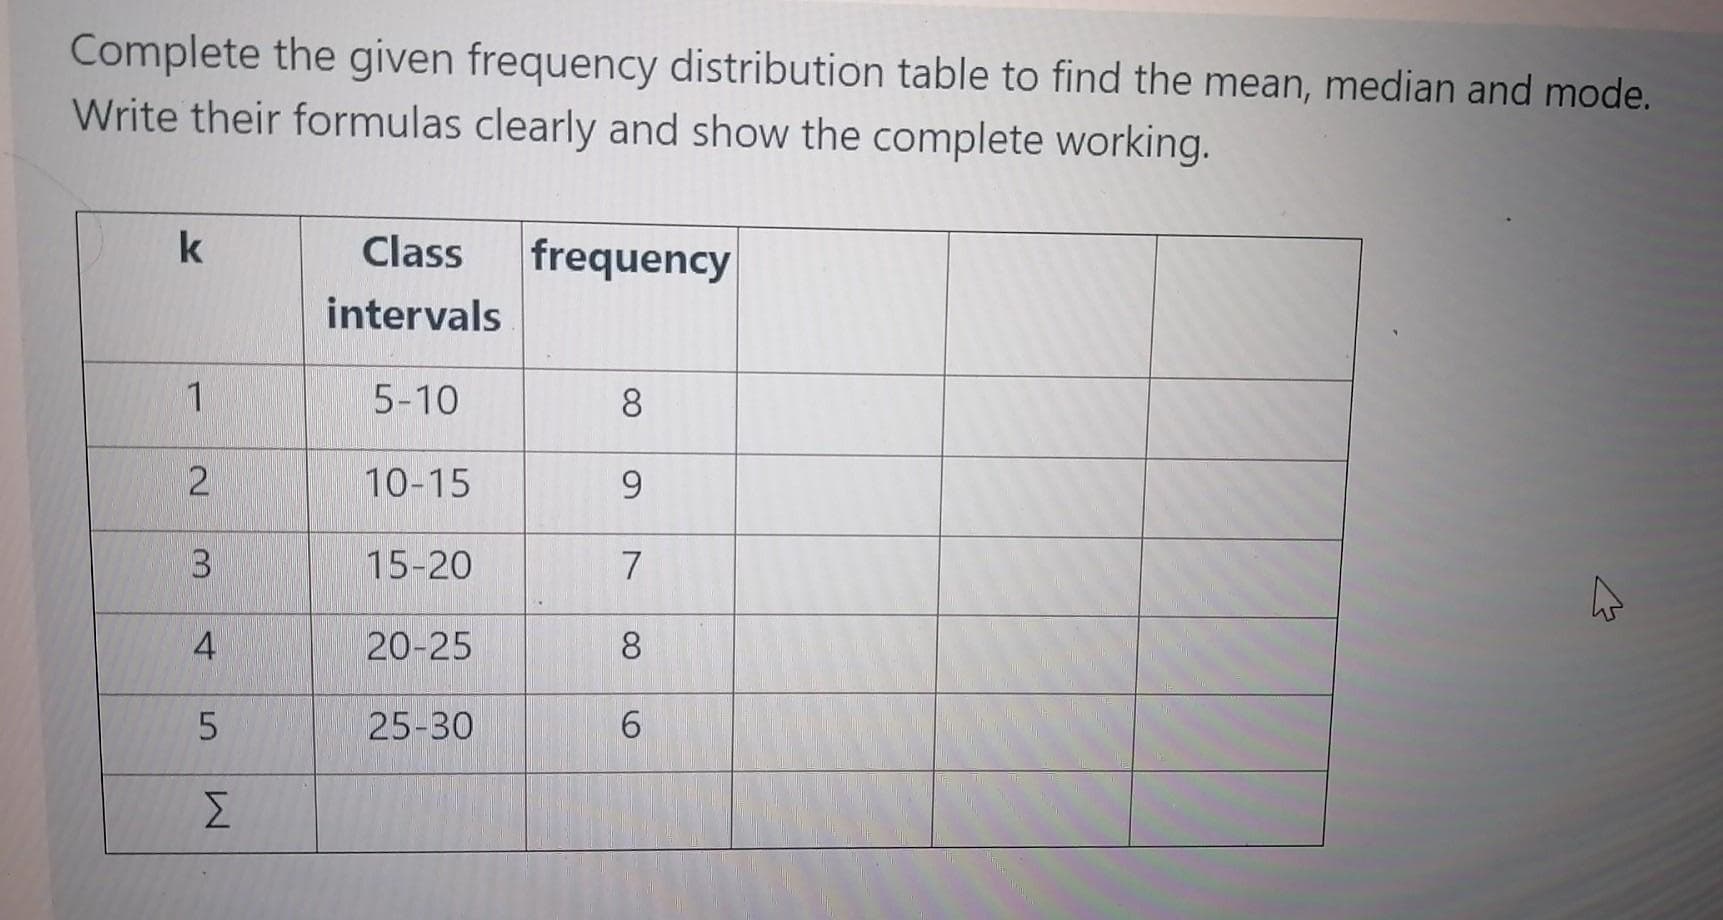 Complete the given frequency distribution table to find the mean, median and mode.
Write their formulas clearly and show the complete working.
Class
frequency
intervals
1
5-10
8
10-15
9.
3.
15-20
4
20-25
8
25-30
6.
Σ
2.
